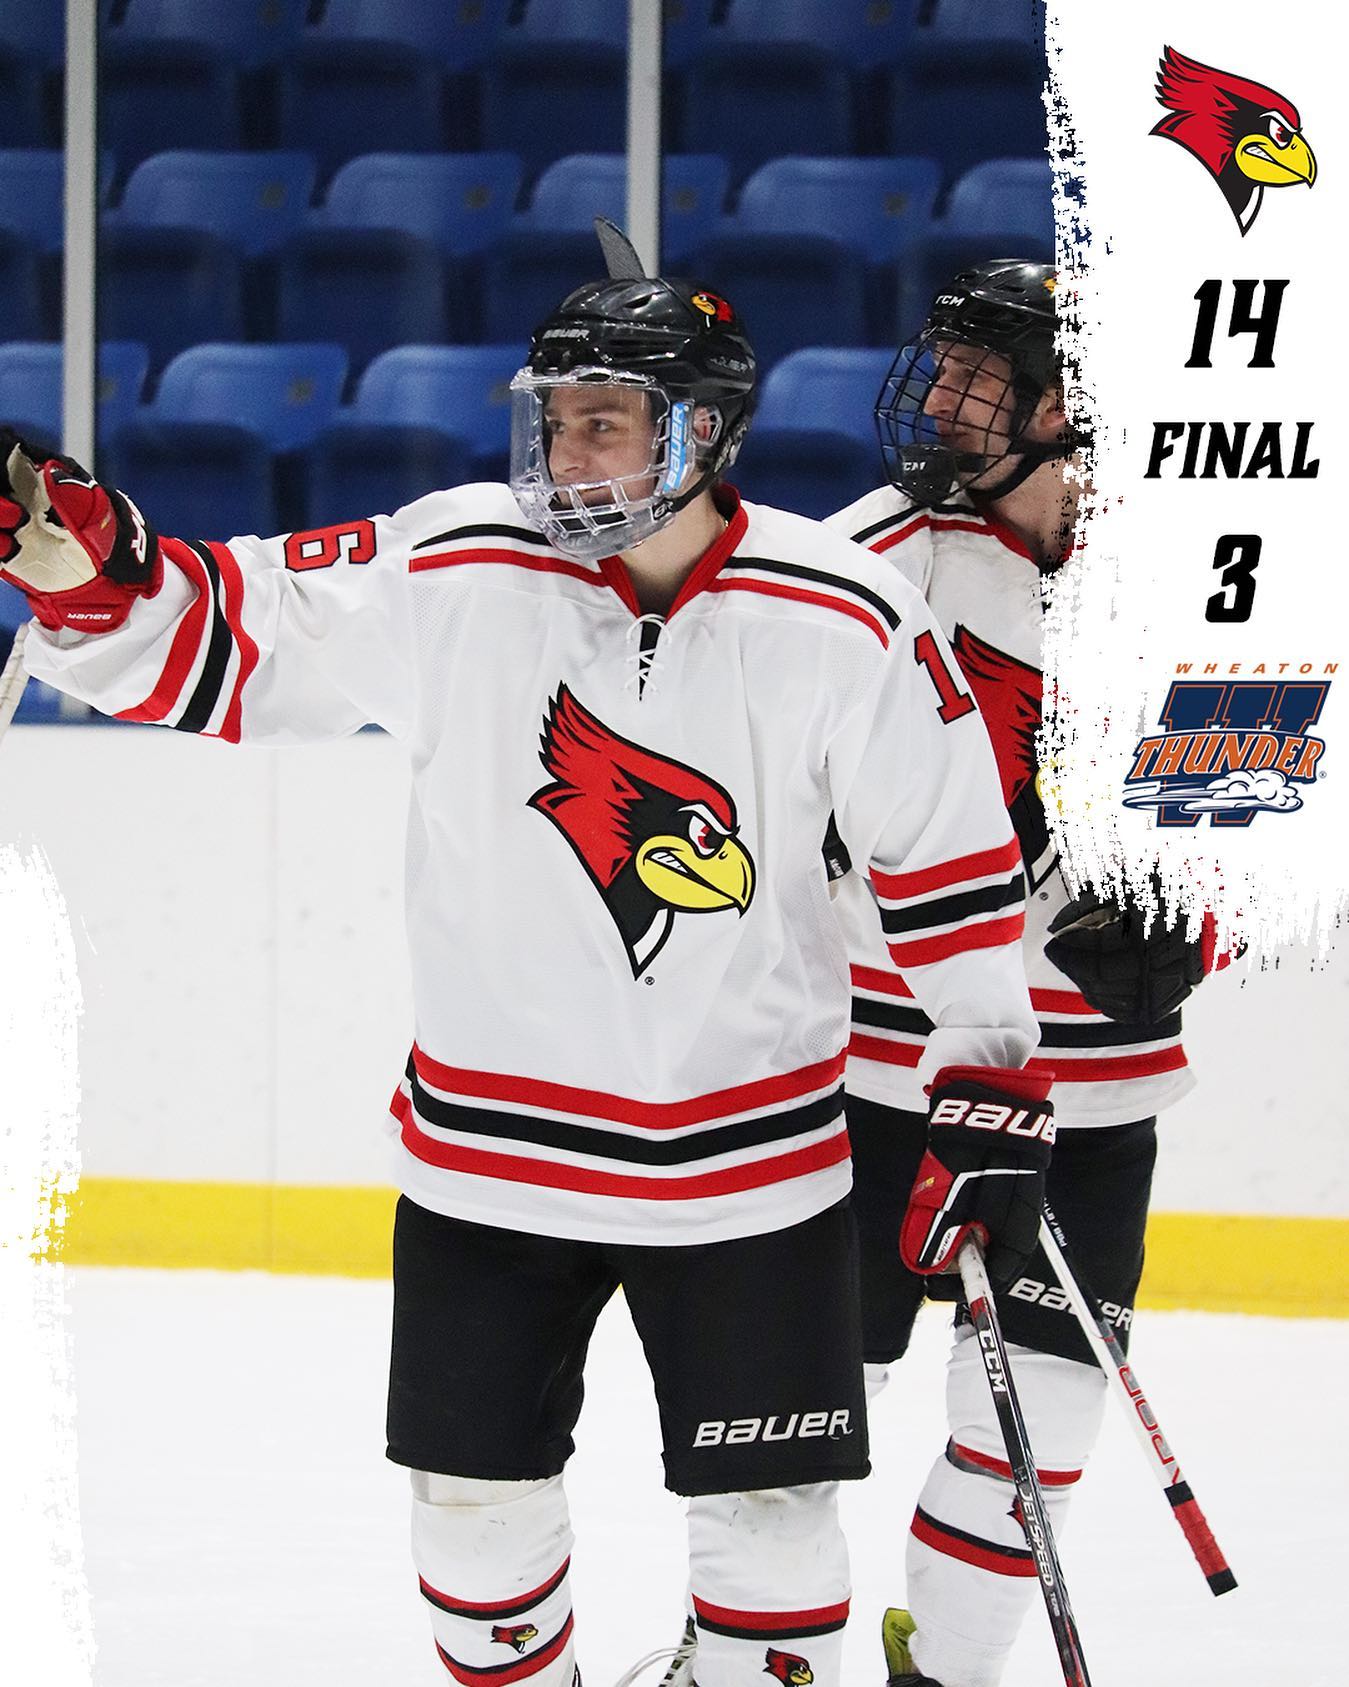 REDBIRDS WIN!!!! D3 gets a high scoring victory against Wheaton. Mike Maggos and Matt Hurtado both collect hat tricks. 

#hereforgood #rollbirds